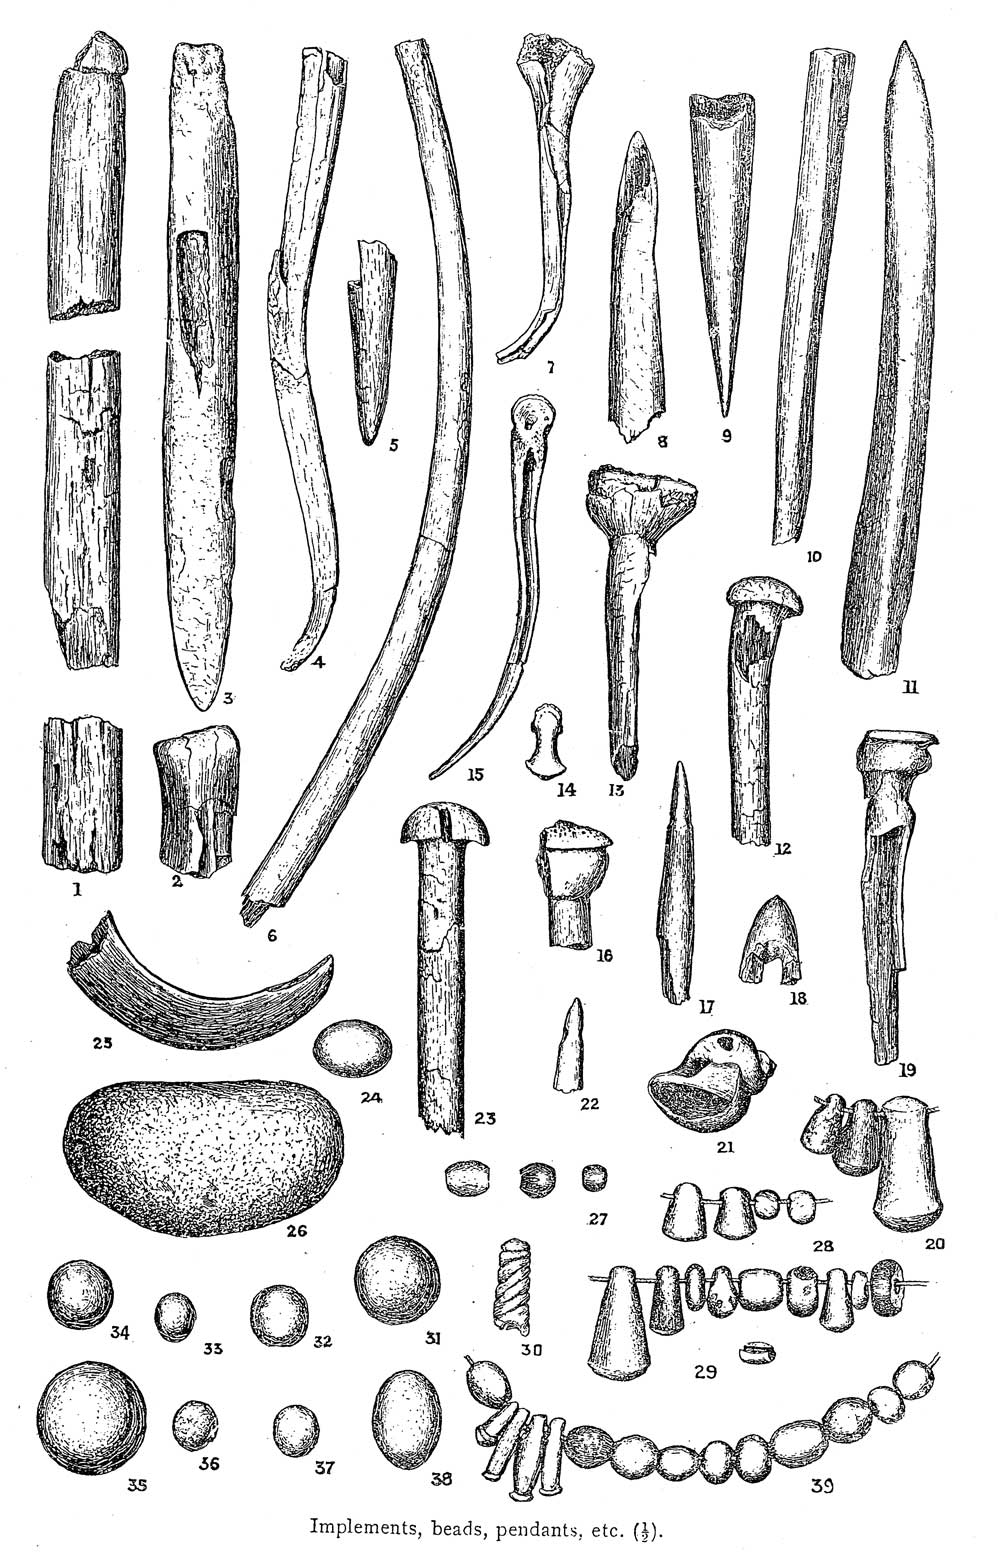 Artifacts from Macalister's excavations at Carrowkeel in 1911.